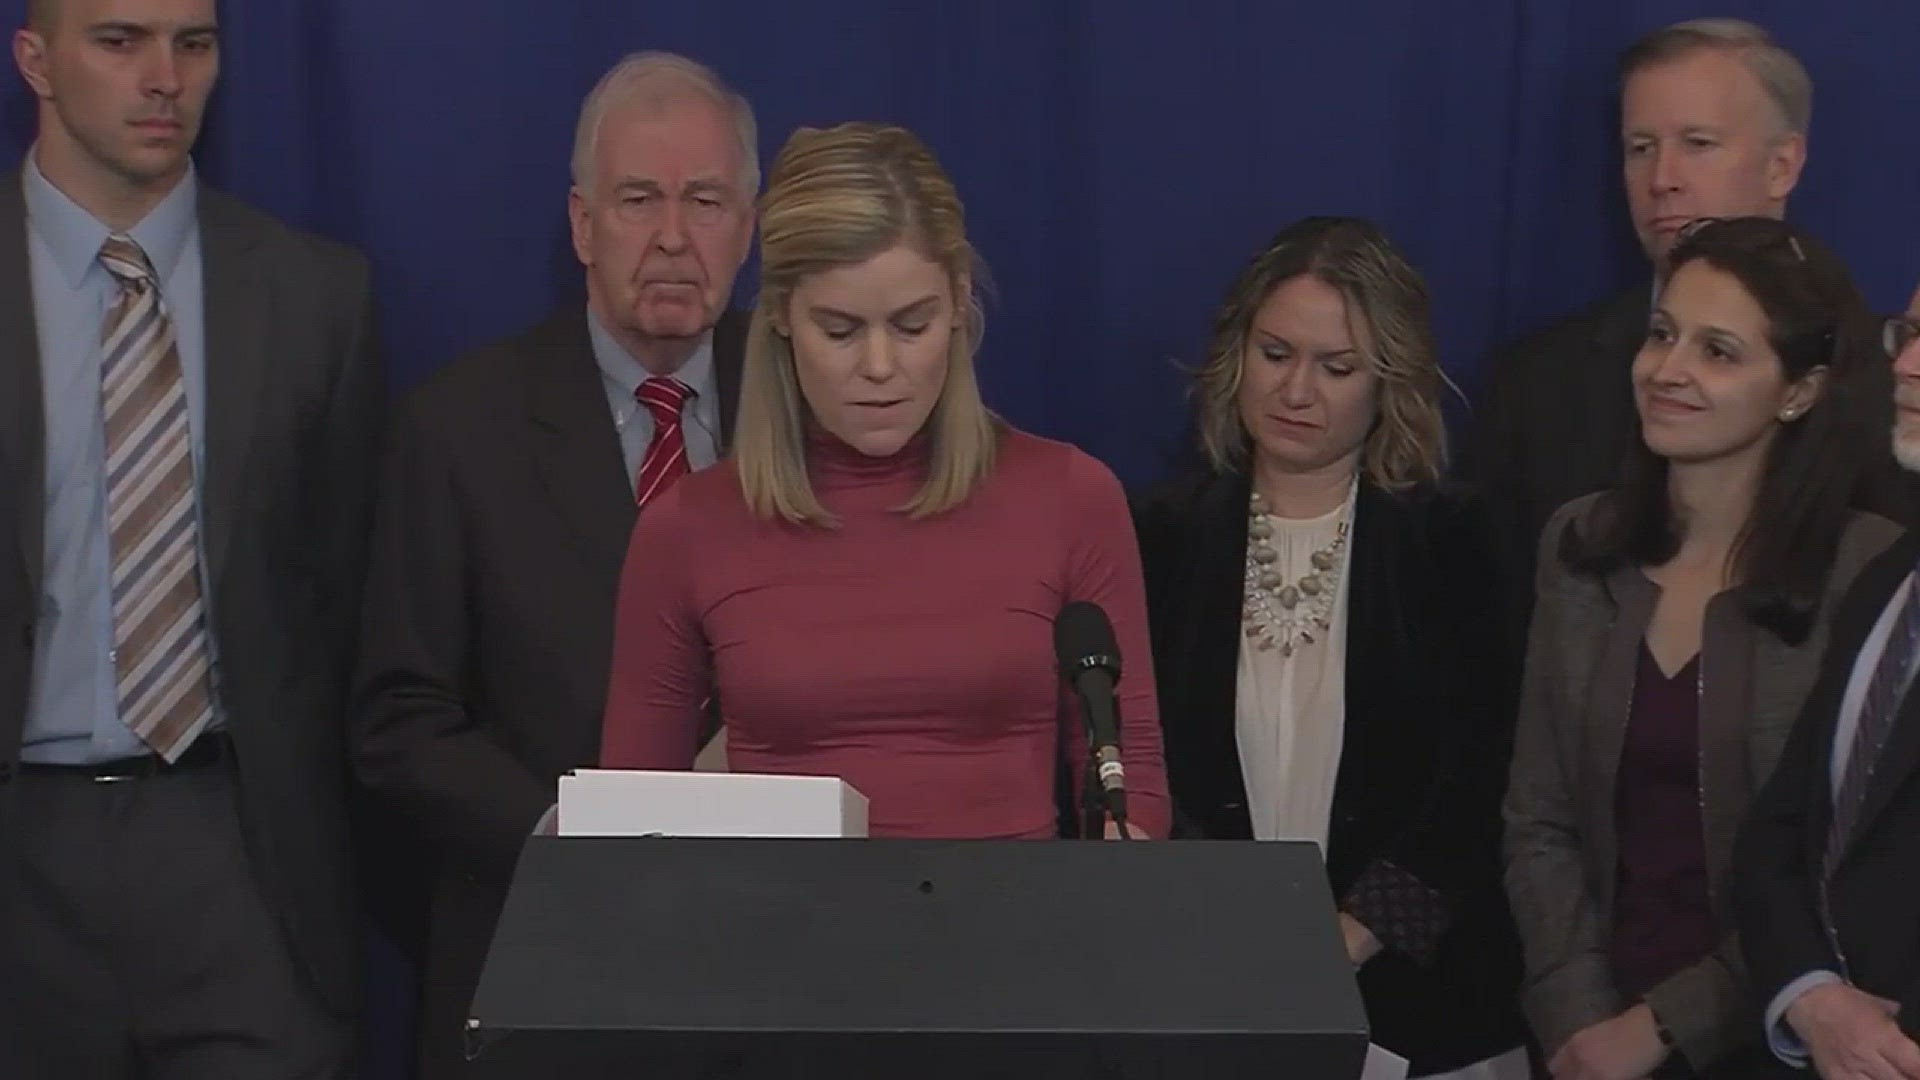 Sexual assault survivor Abby Haglage delivers a powerful speech about her experience.